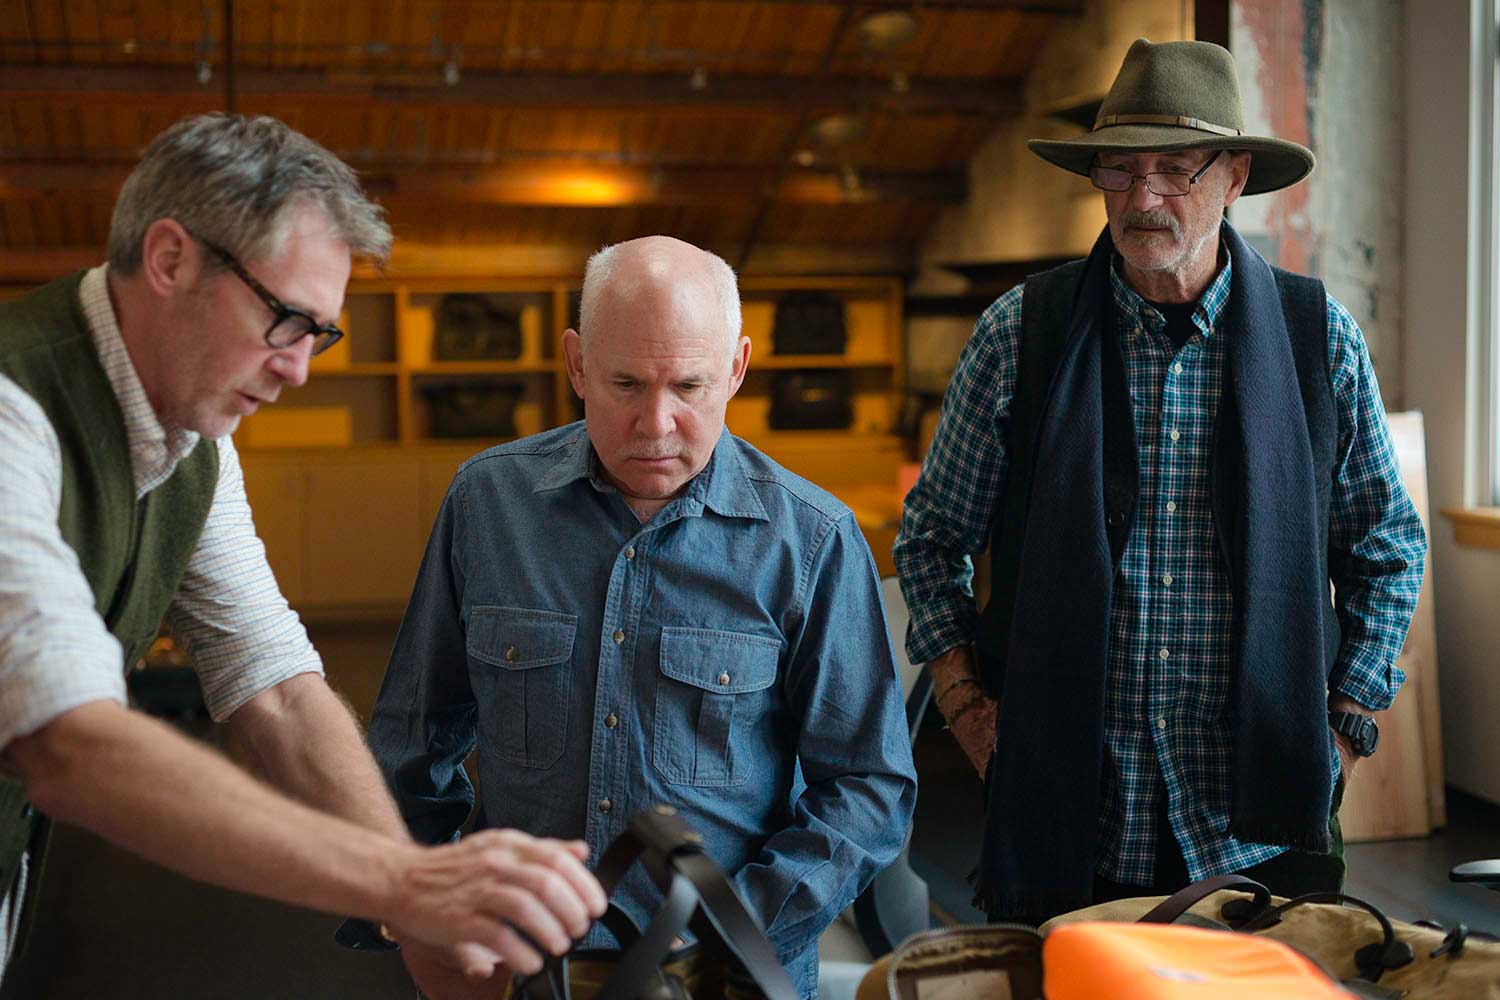 L to R) Filson CEO Alan Kirk and Magnum photographers Steve McCurry and David Alan Harvey at the Filson headquarters in Seattle during the initial design process for the new line of camera bags being launched on May 1, 2014.